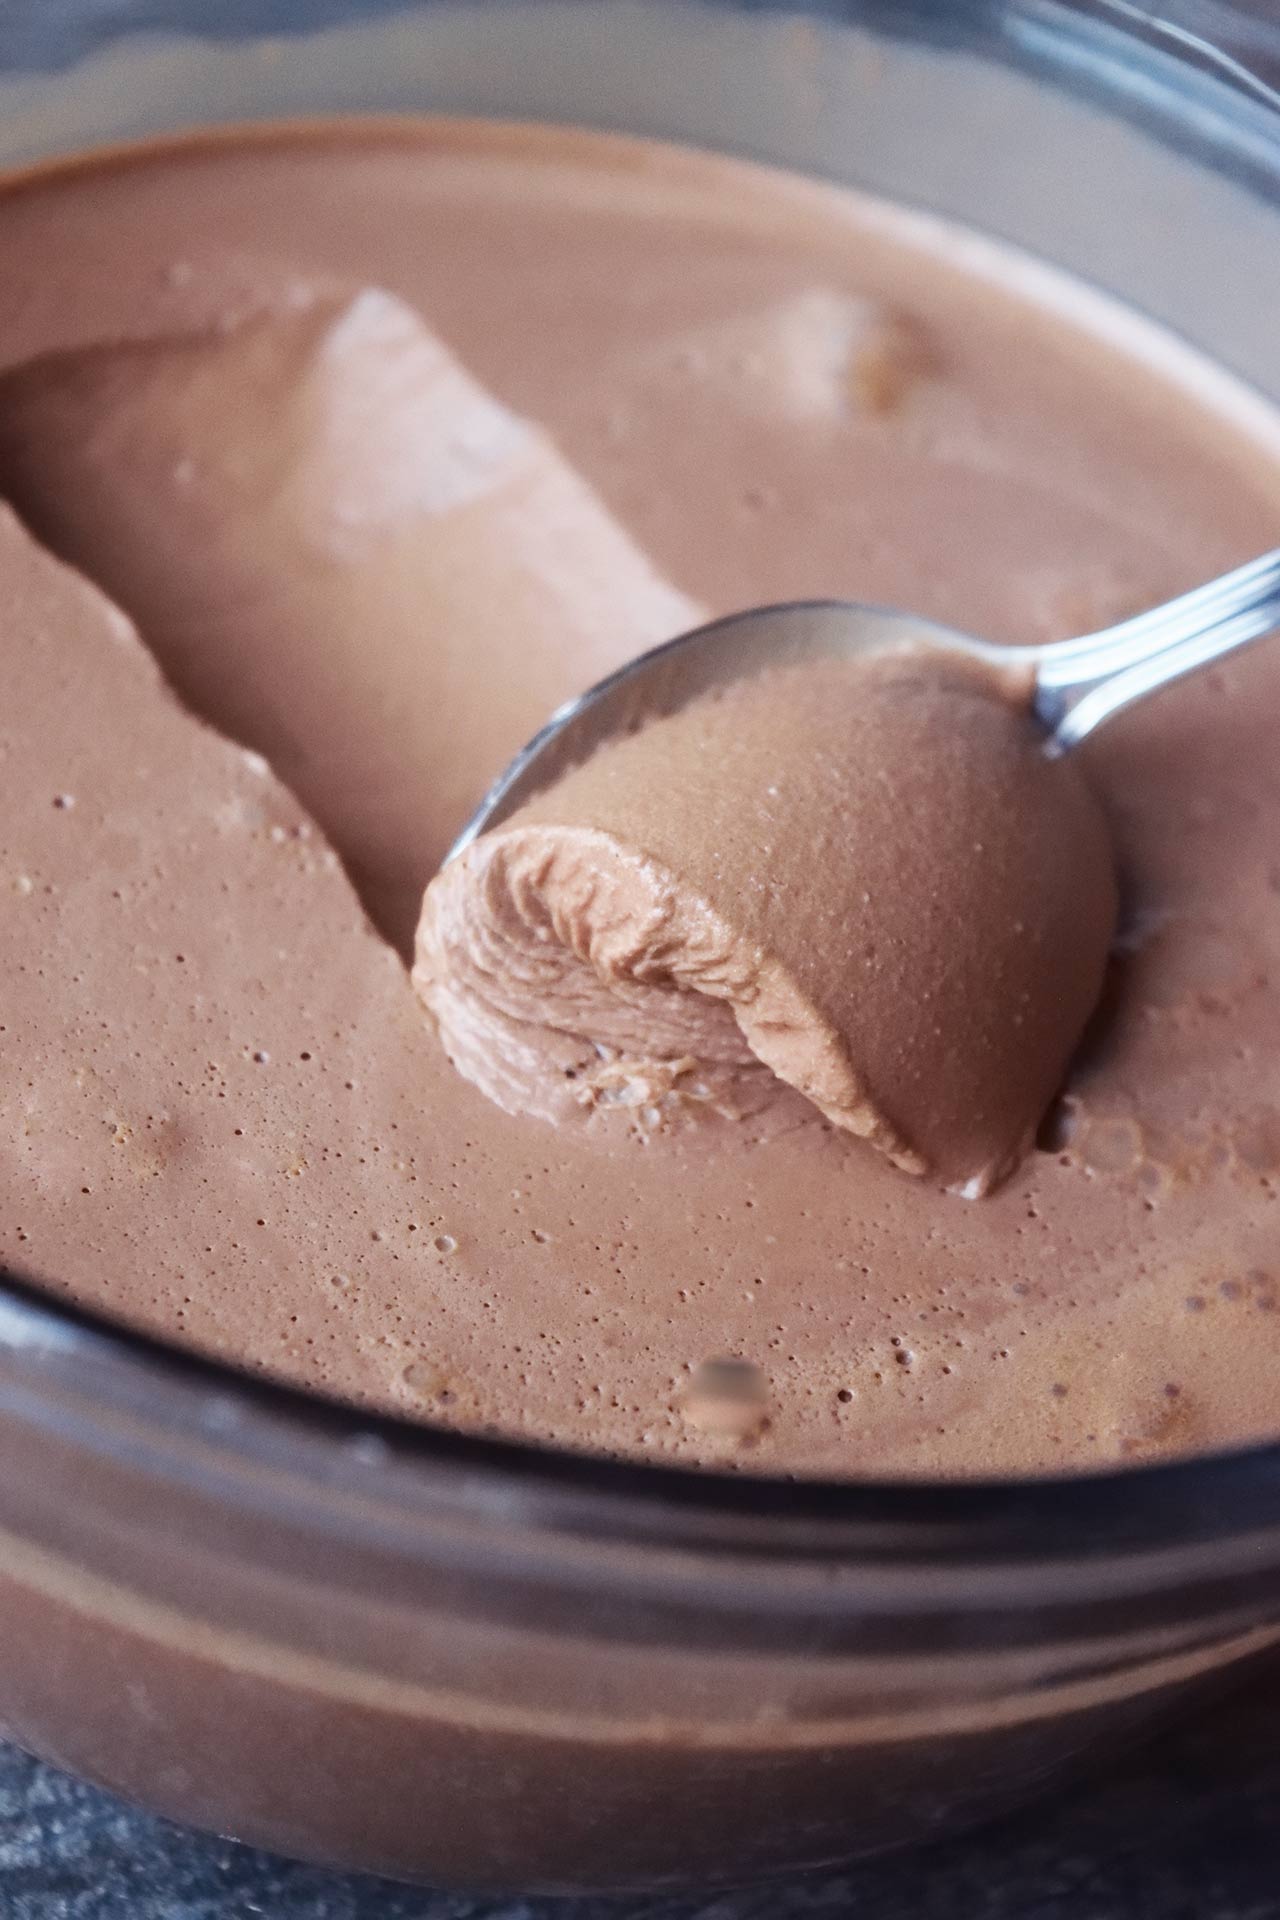 A closeup of a spoon scooping up some chocolate mousse.